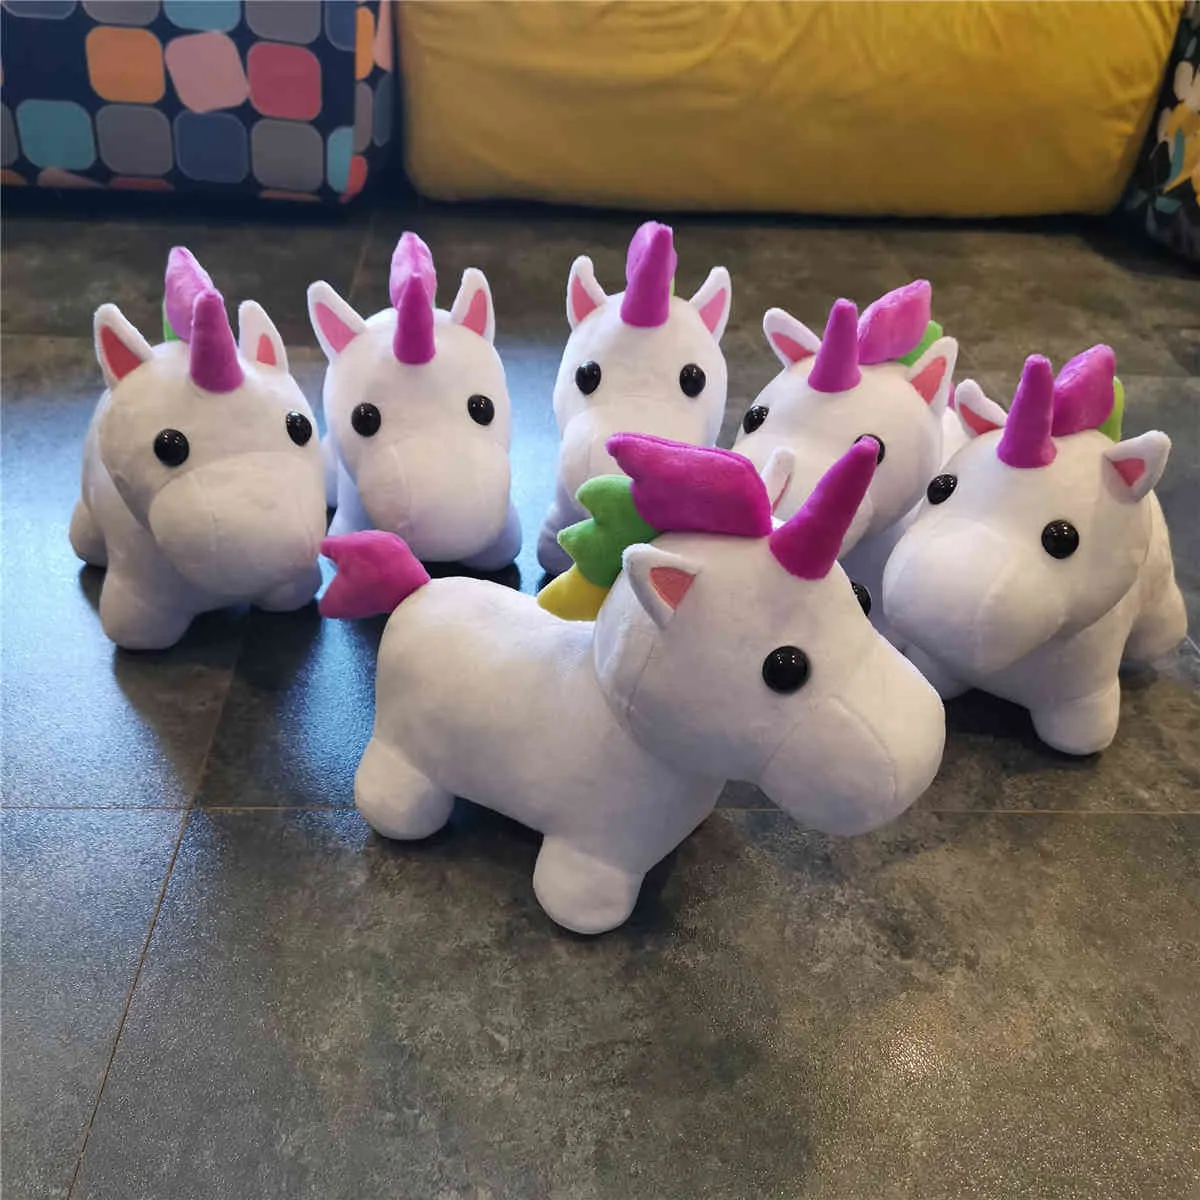 Adopt Me Plush Unicorn Pets Jugetes 10 Inches Game Peluche Piggy Action  Figures And Cute Stuffed Dolls By Robloxing 301E From Governor011, $9.78